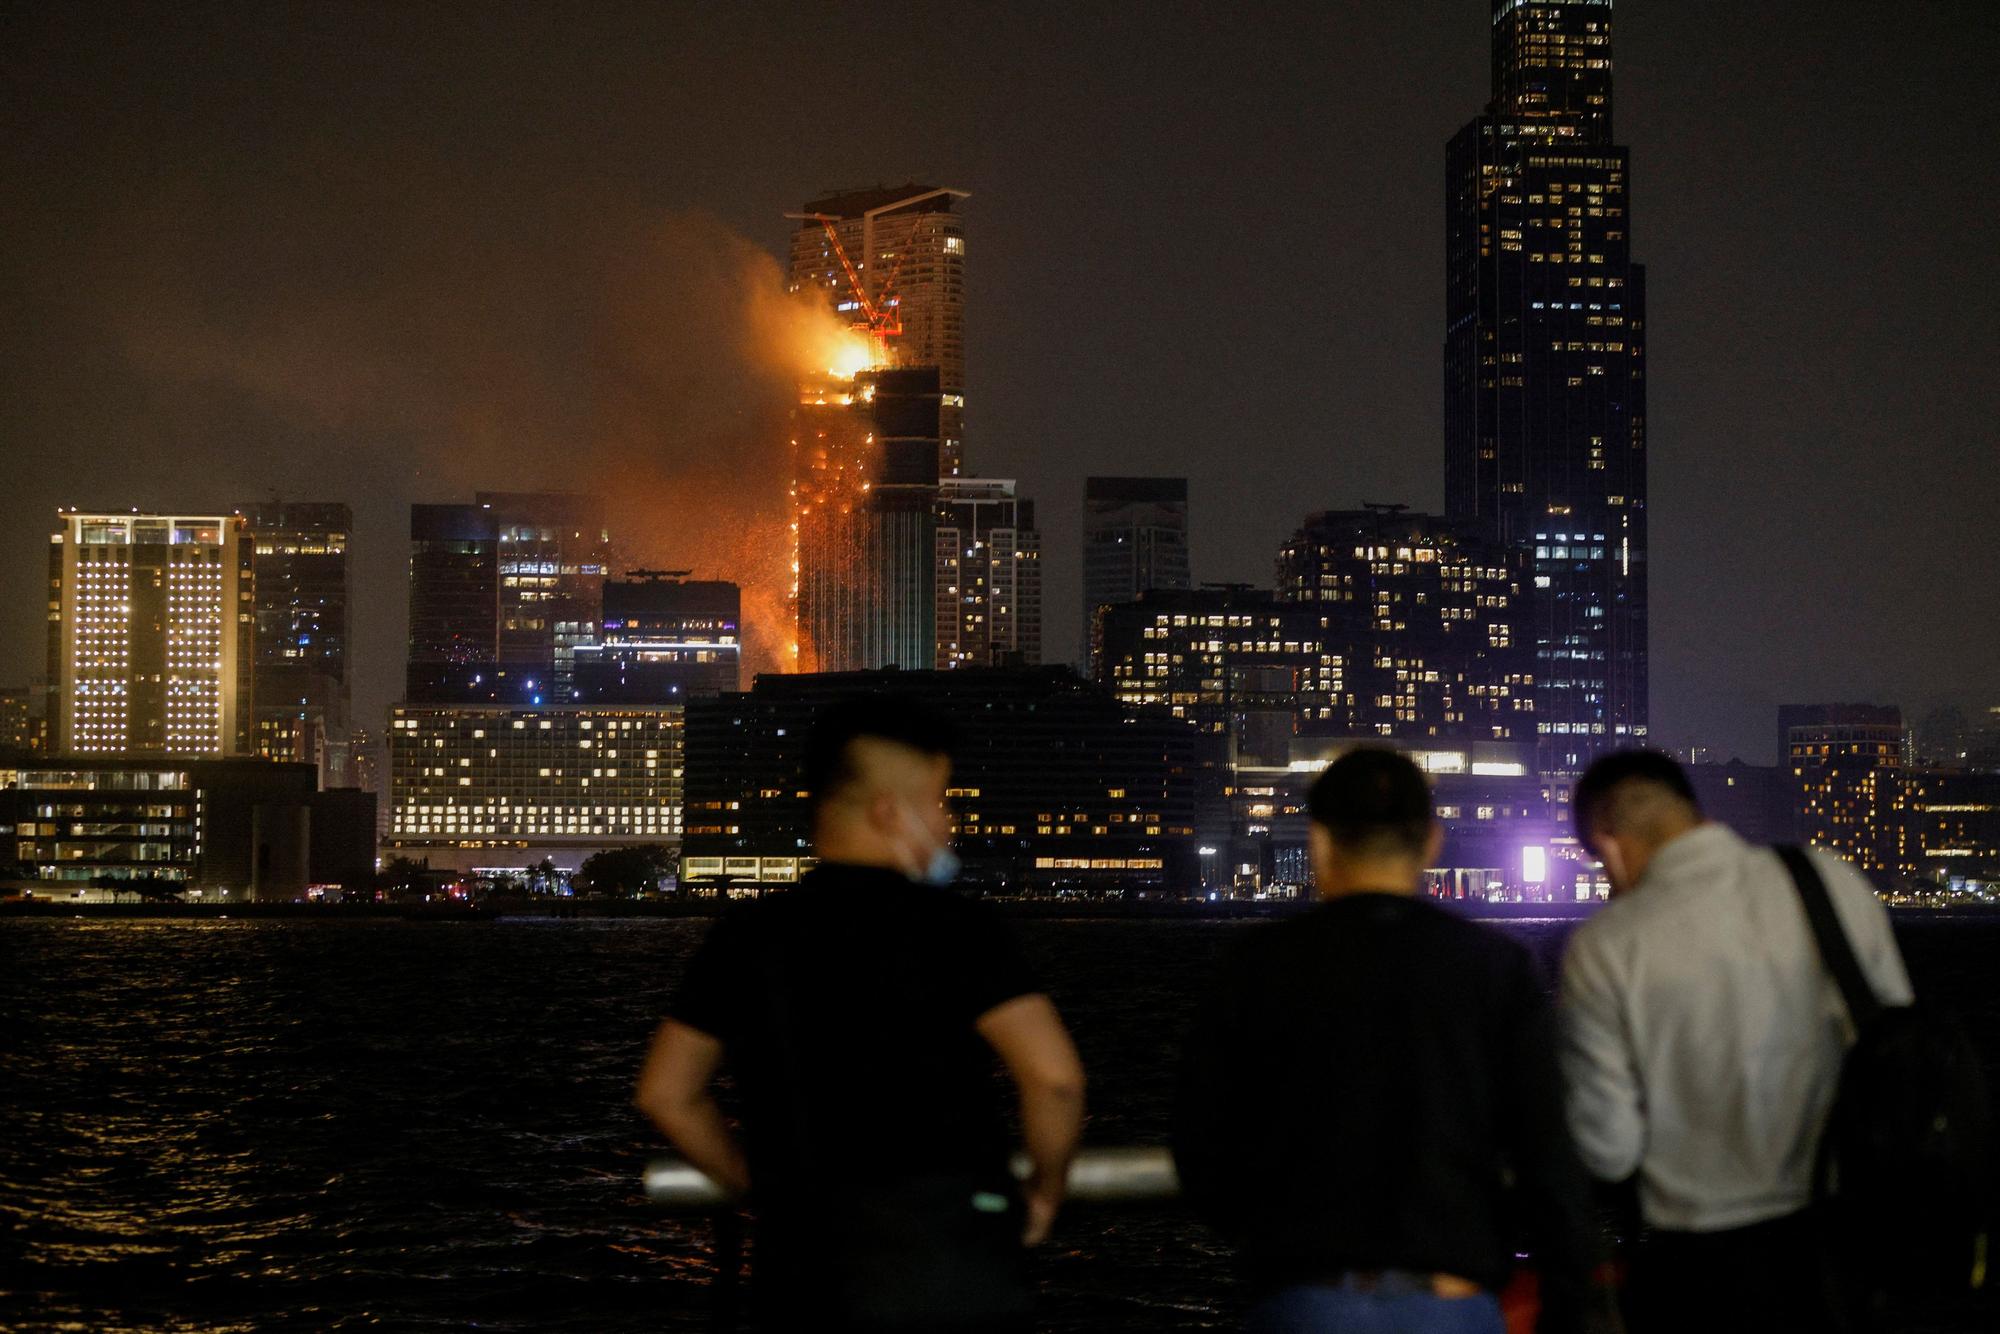 A building is seen on fire in Hong Kong